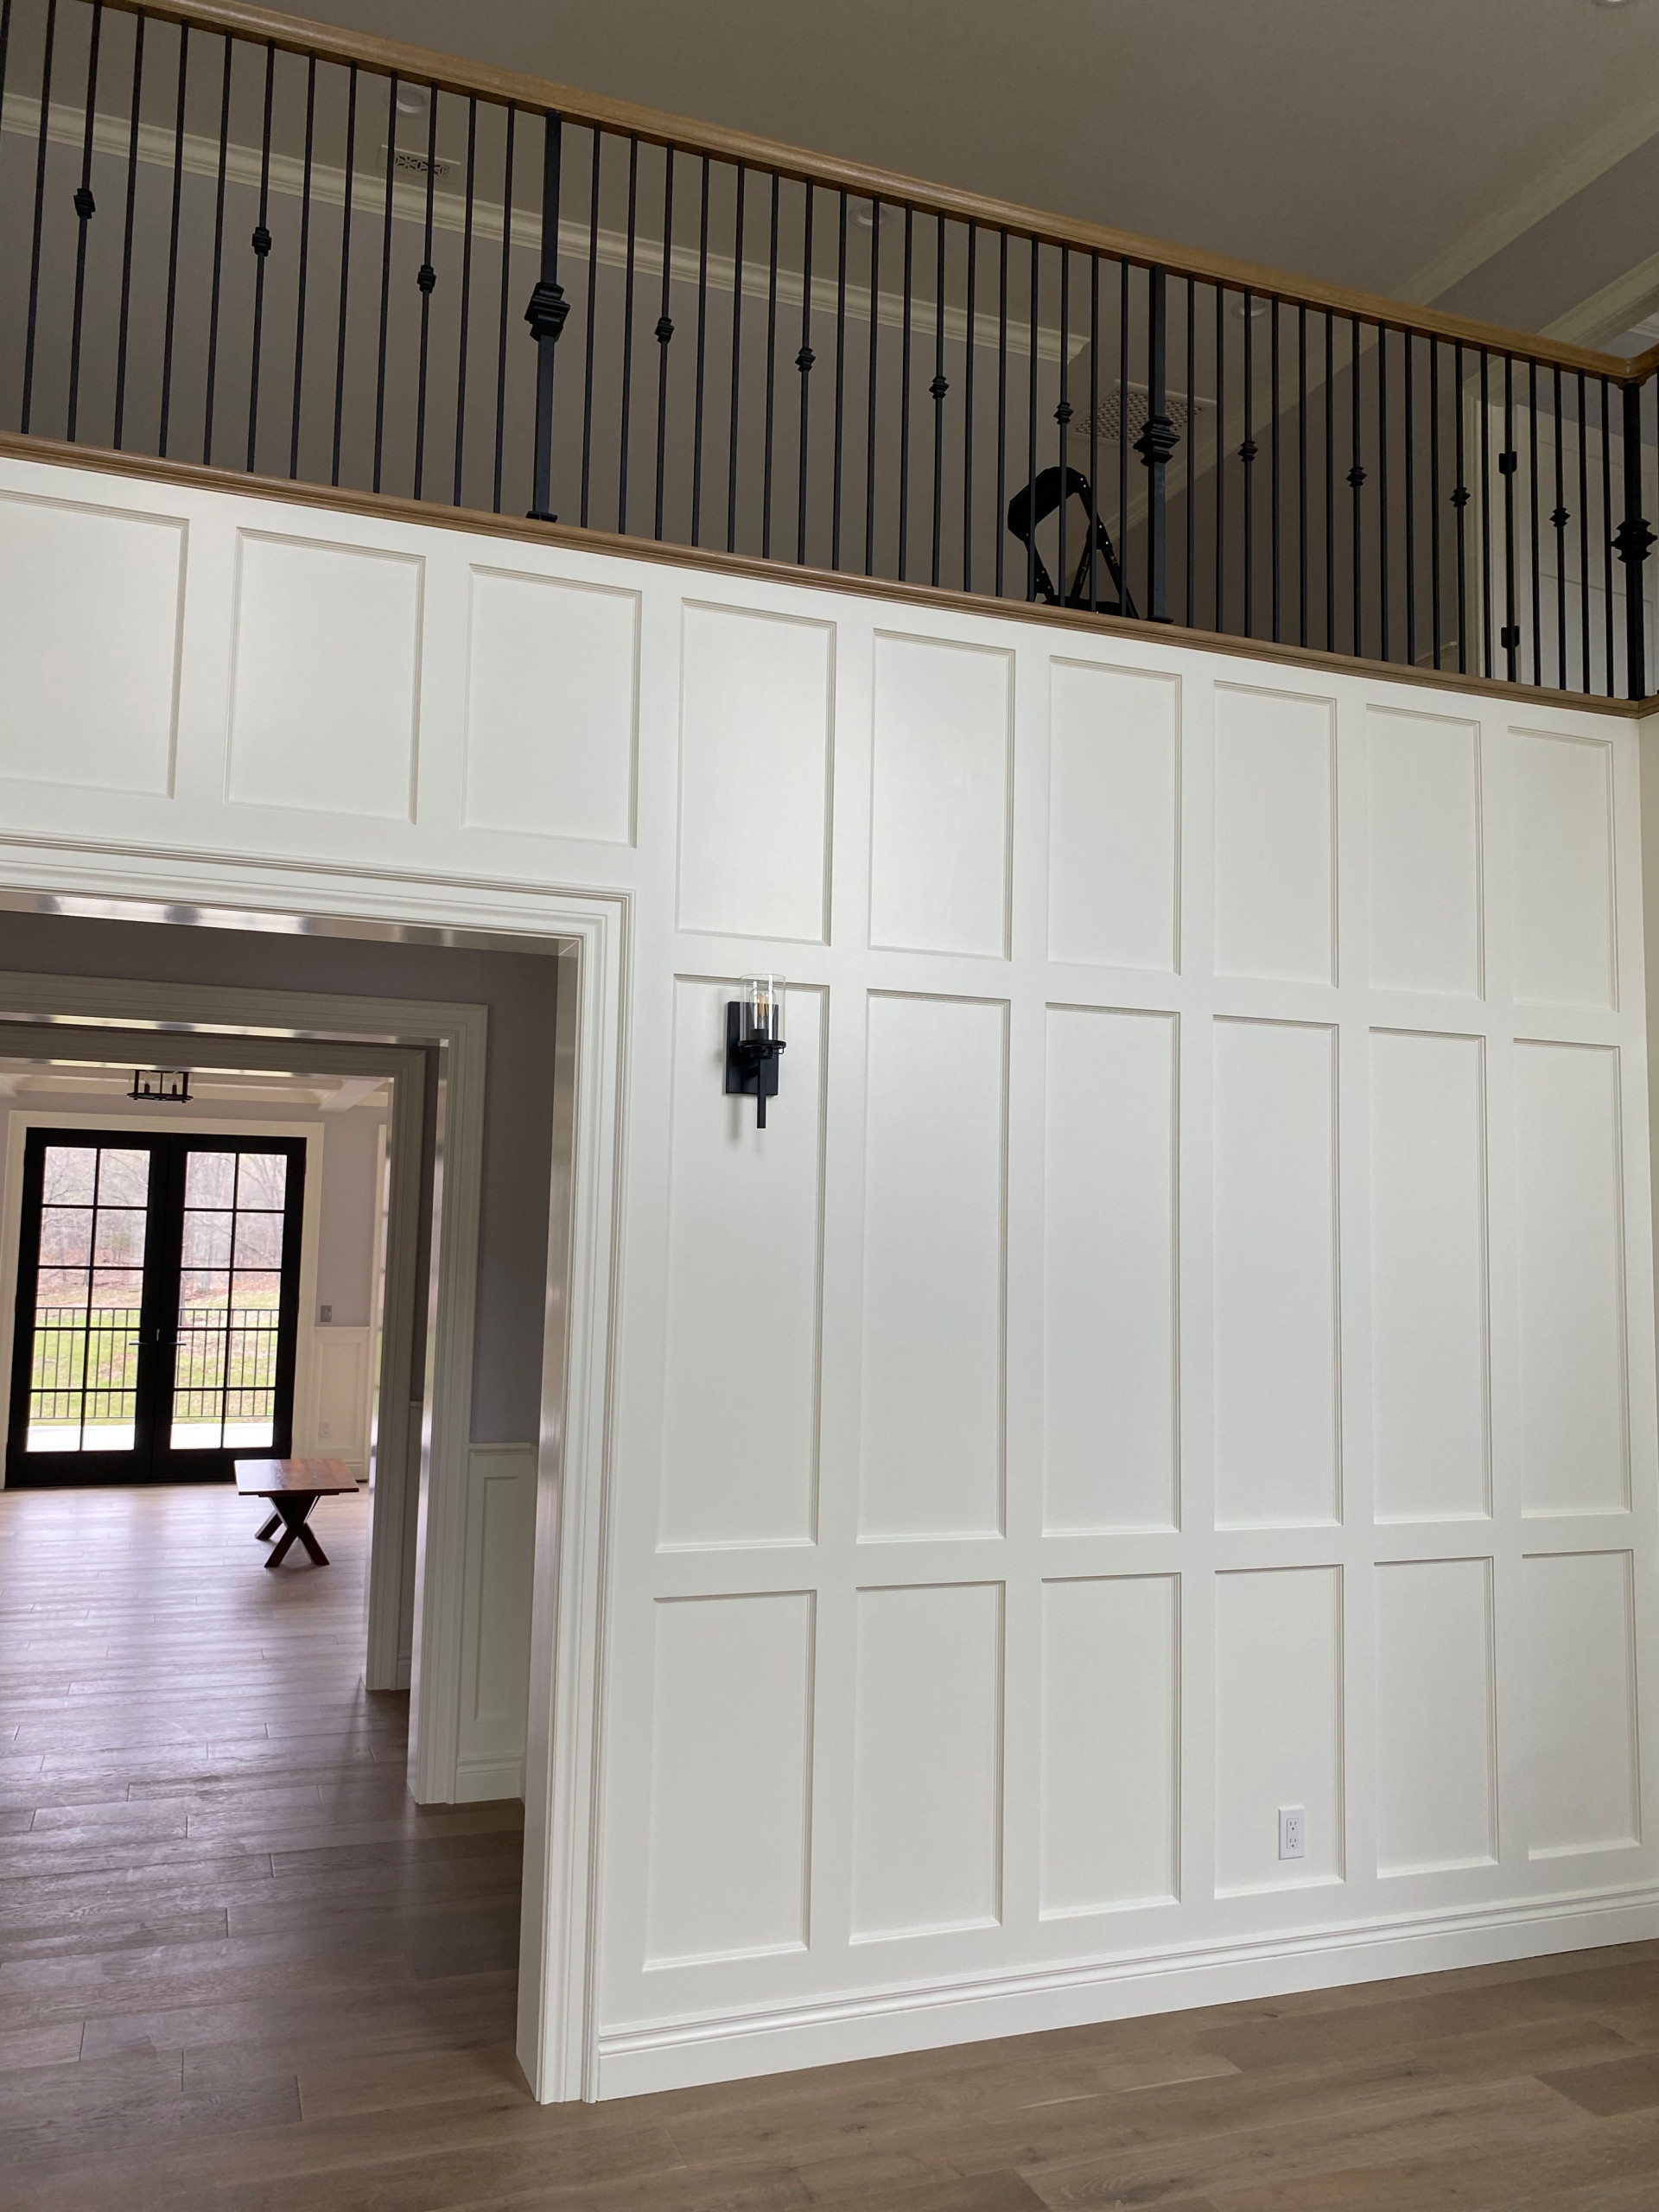 Balcony from entryway point of view (white painted wainscoting in entry)